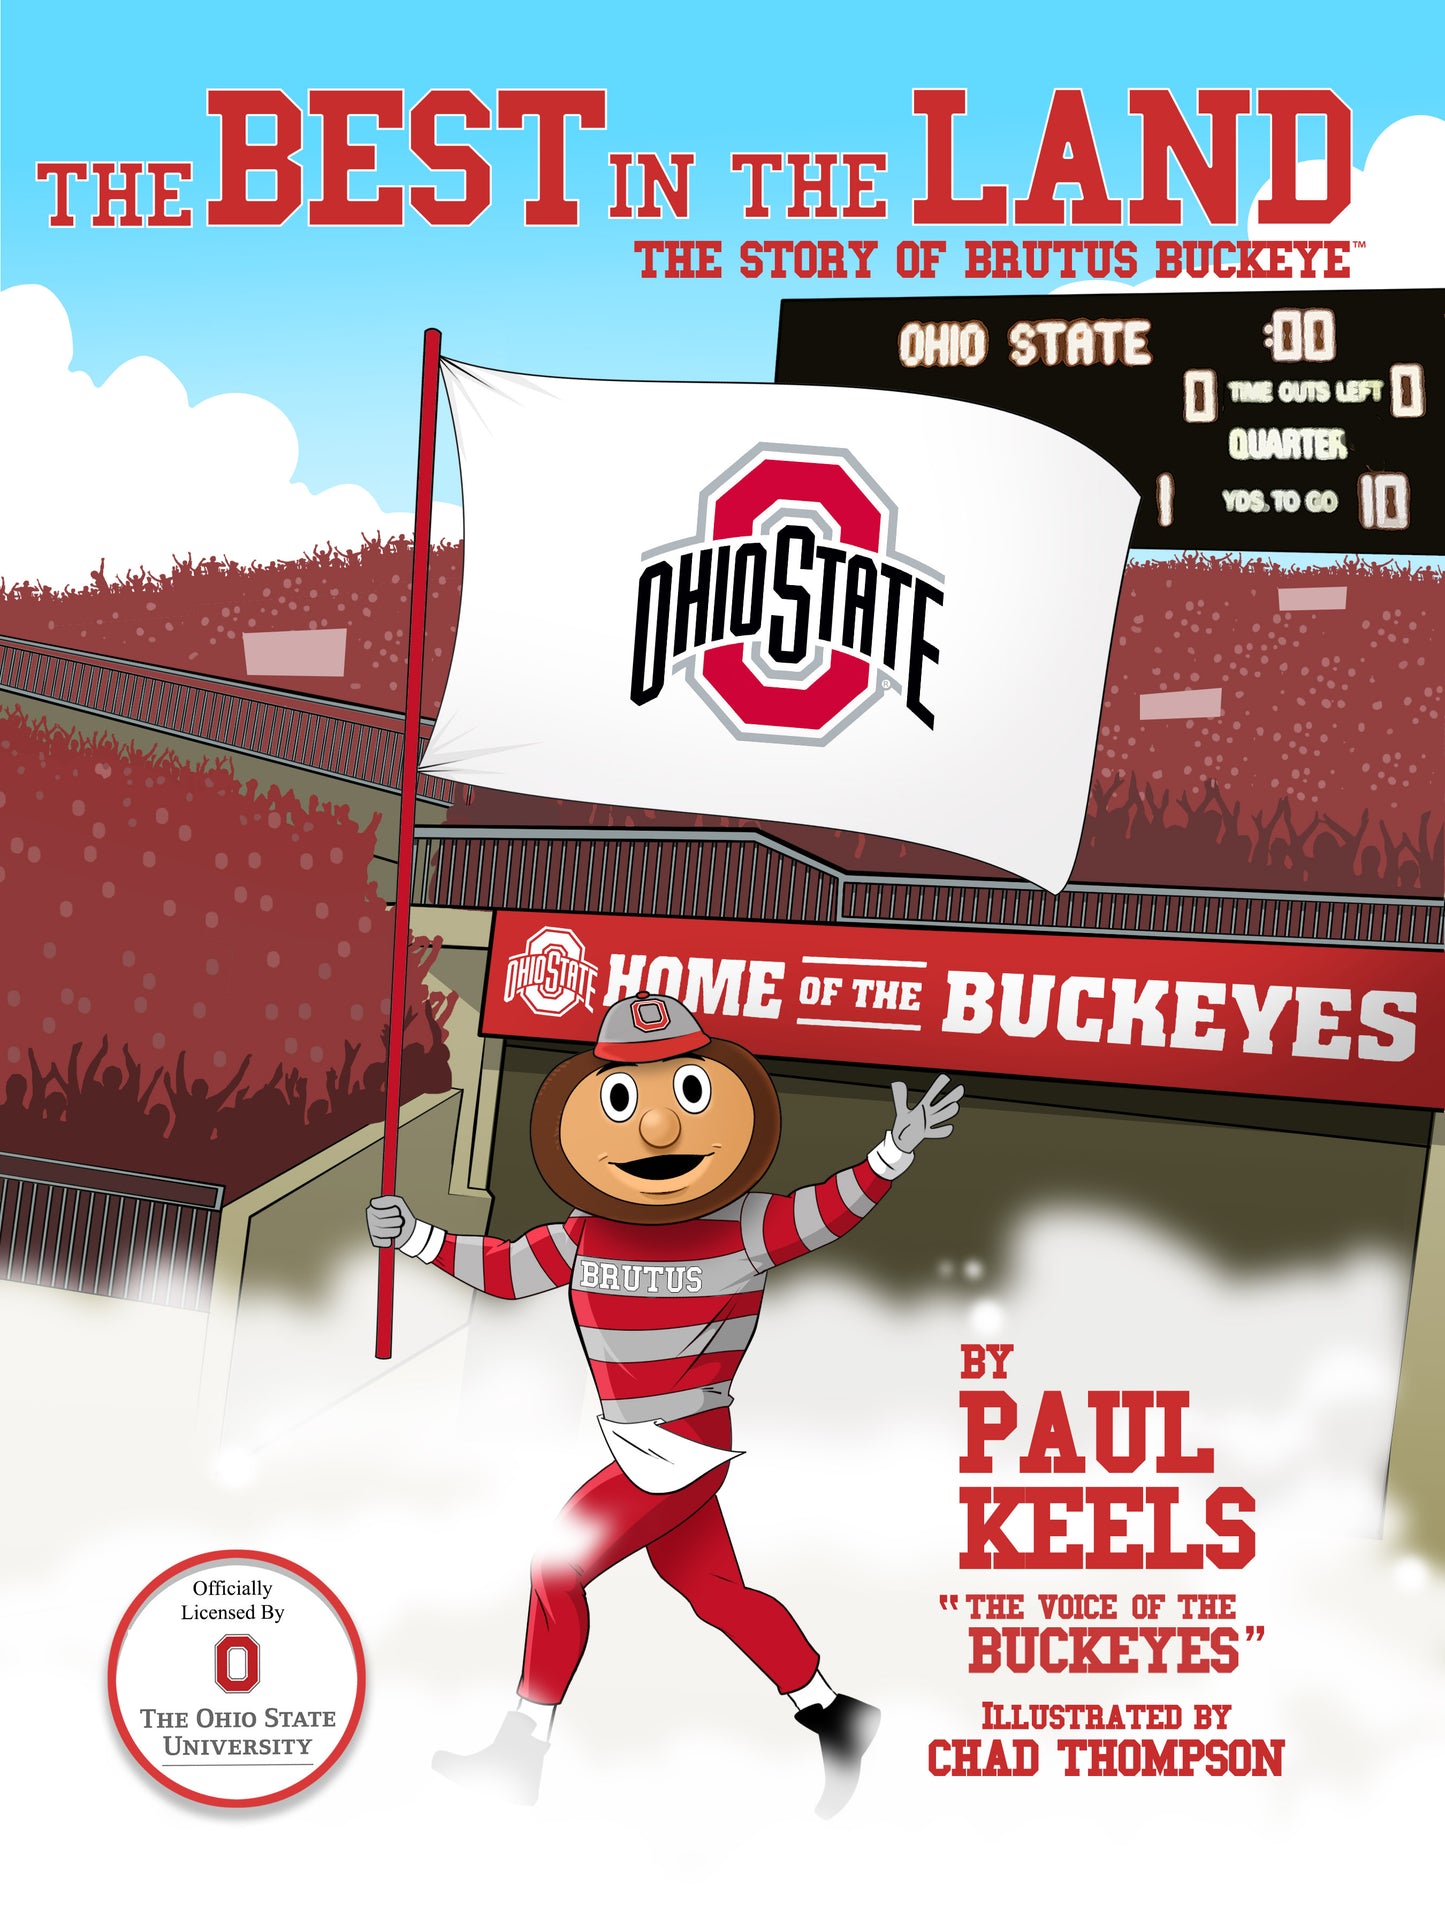 The Best in the Land - The Story of Brutus the Buckeye